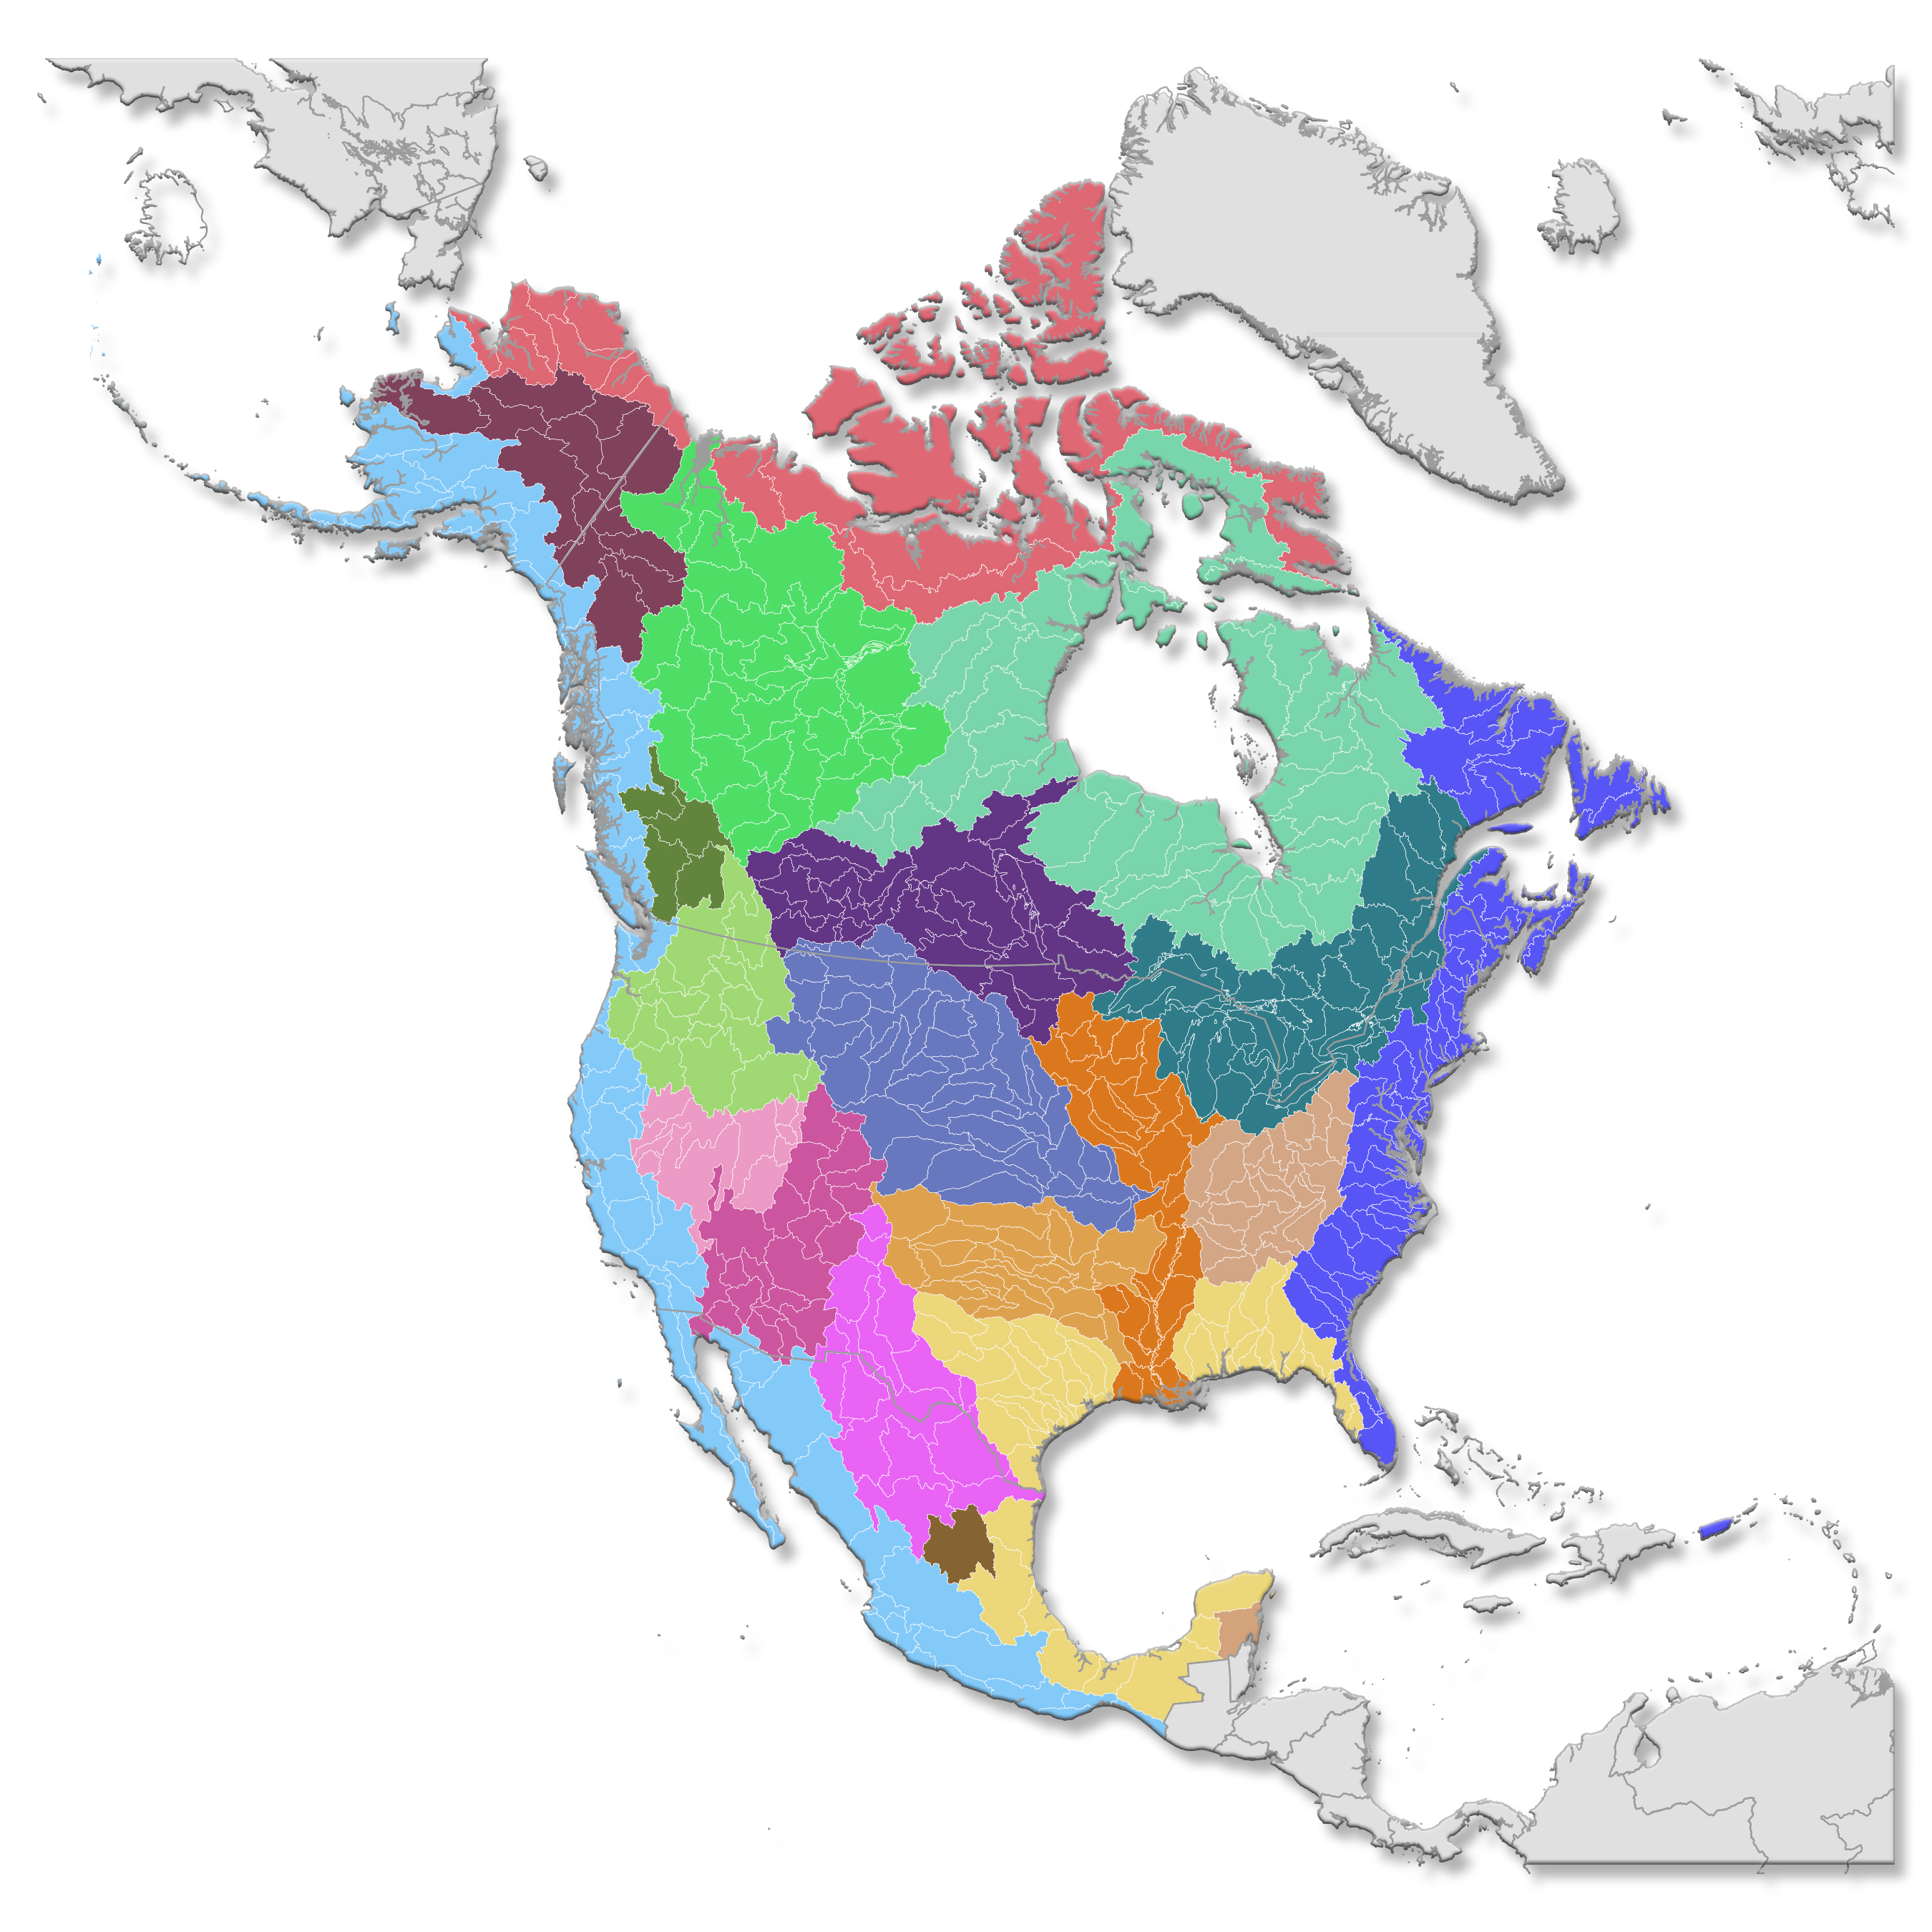 Watershed boundaries across the continent